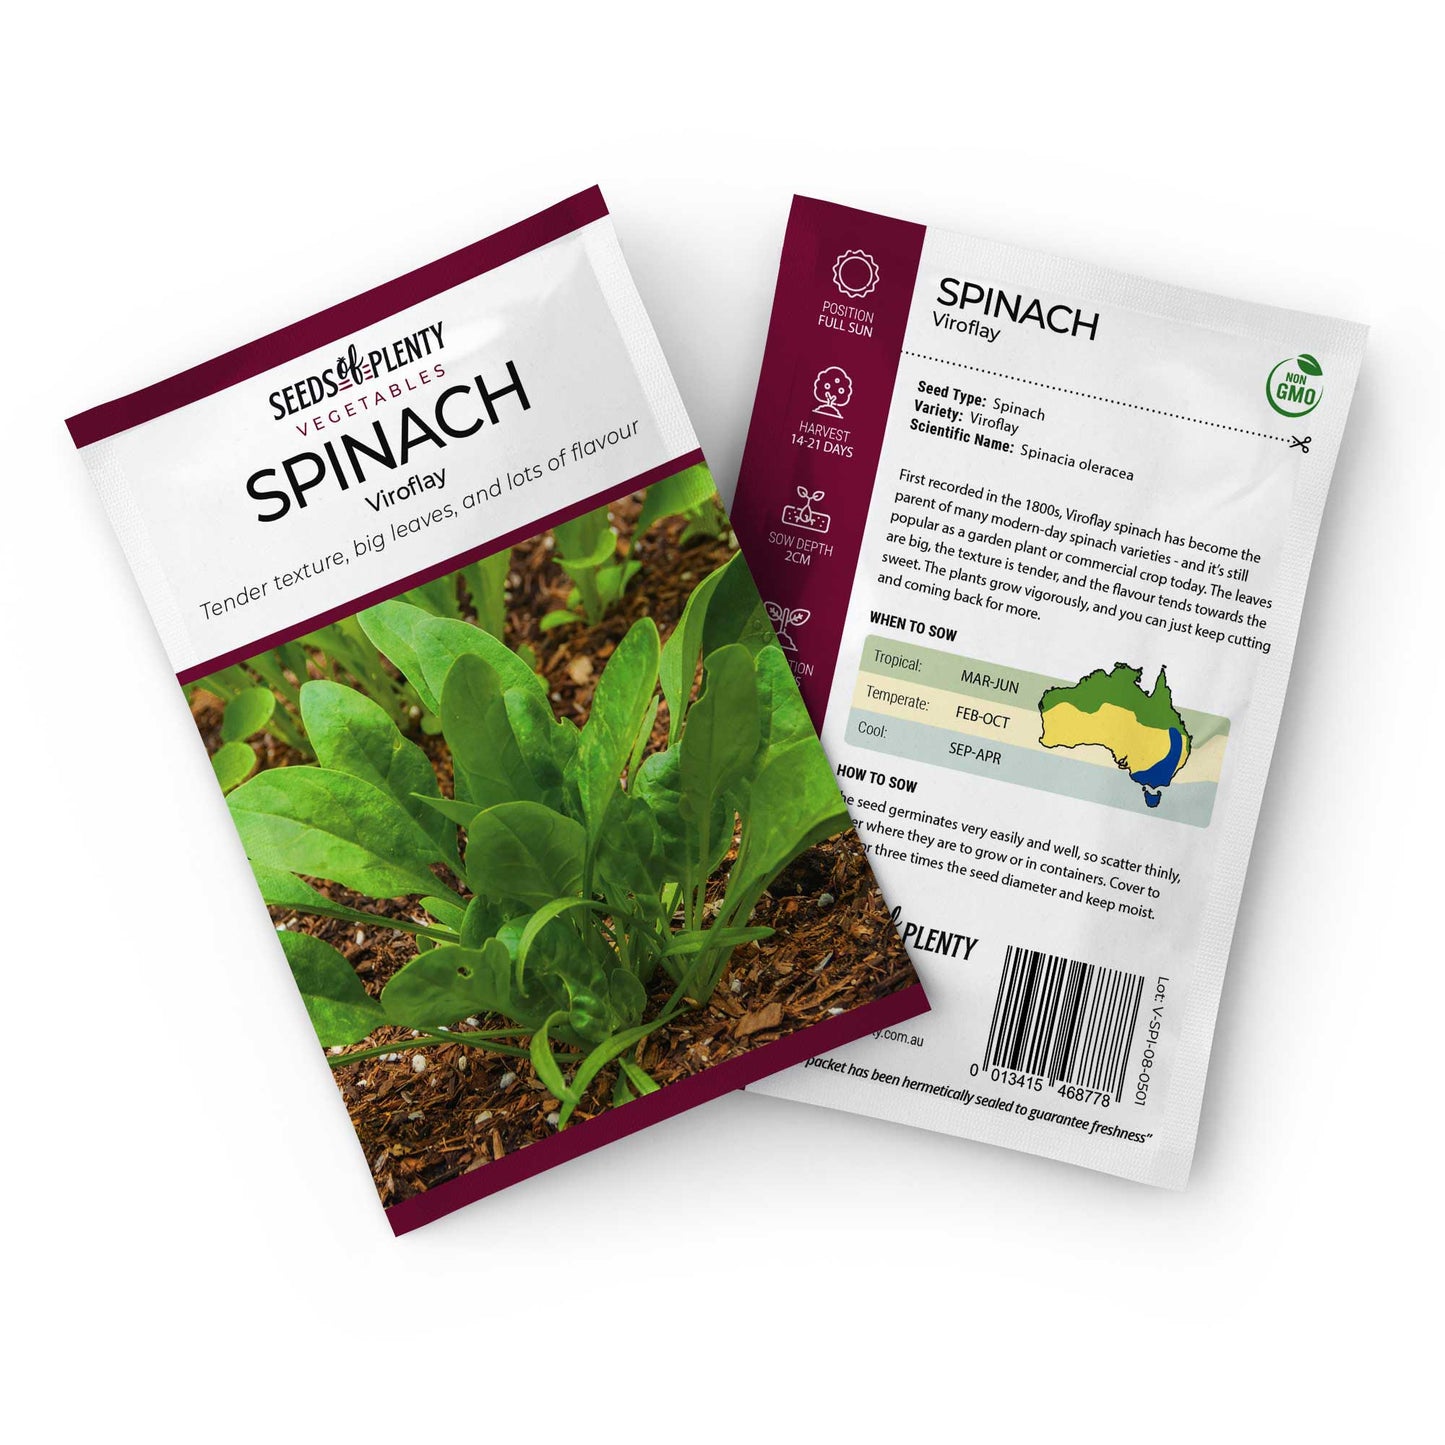 SPINACH - Viroflay Default Title